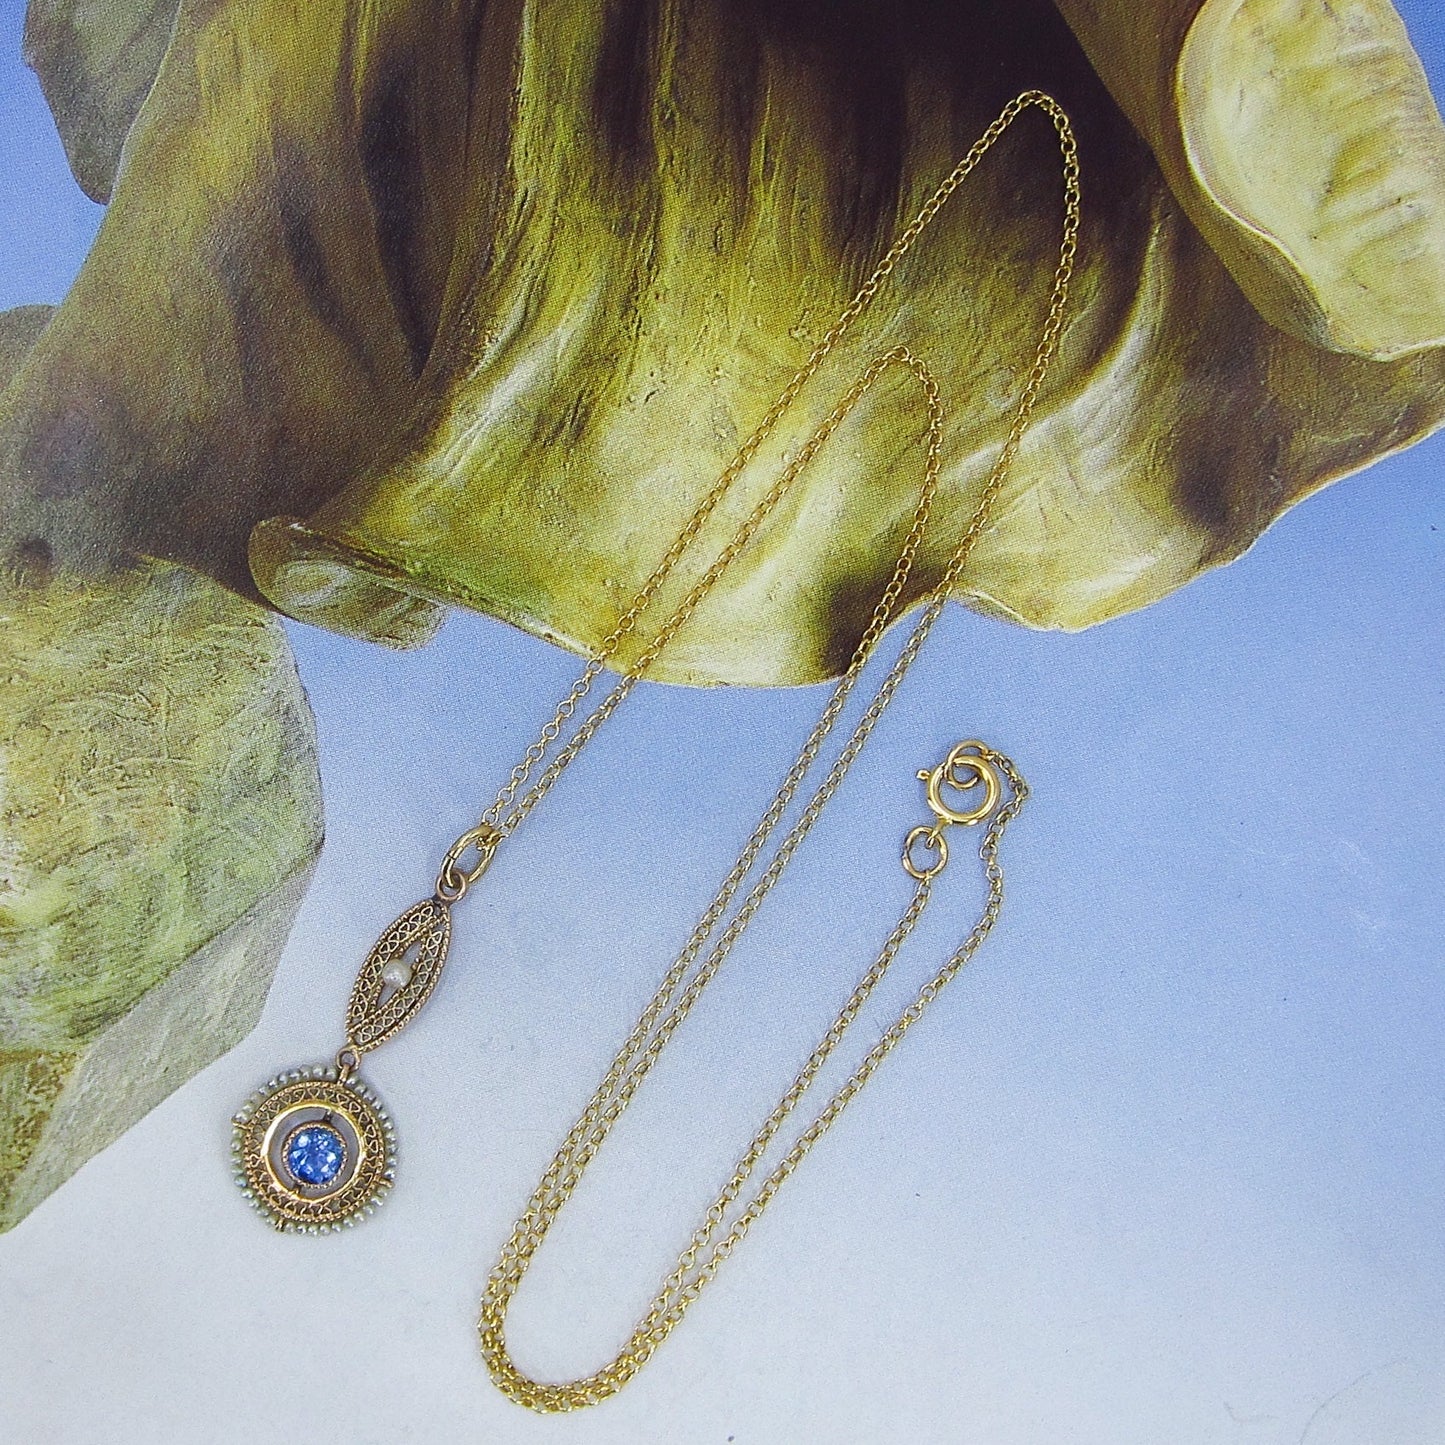 SOLD-Edwardian Seed Pearl and Blue Glass Pendant 10k c. 1910